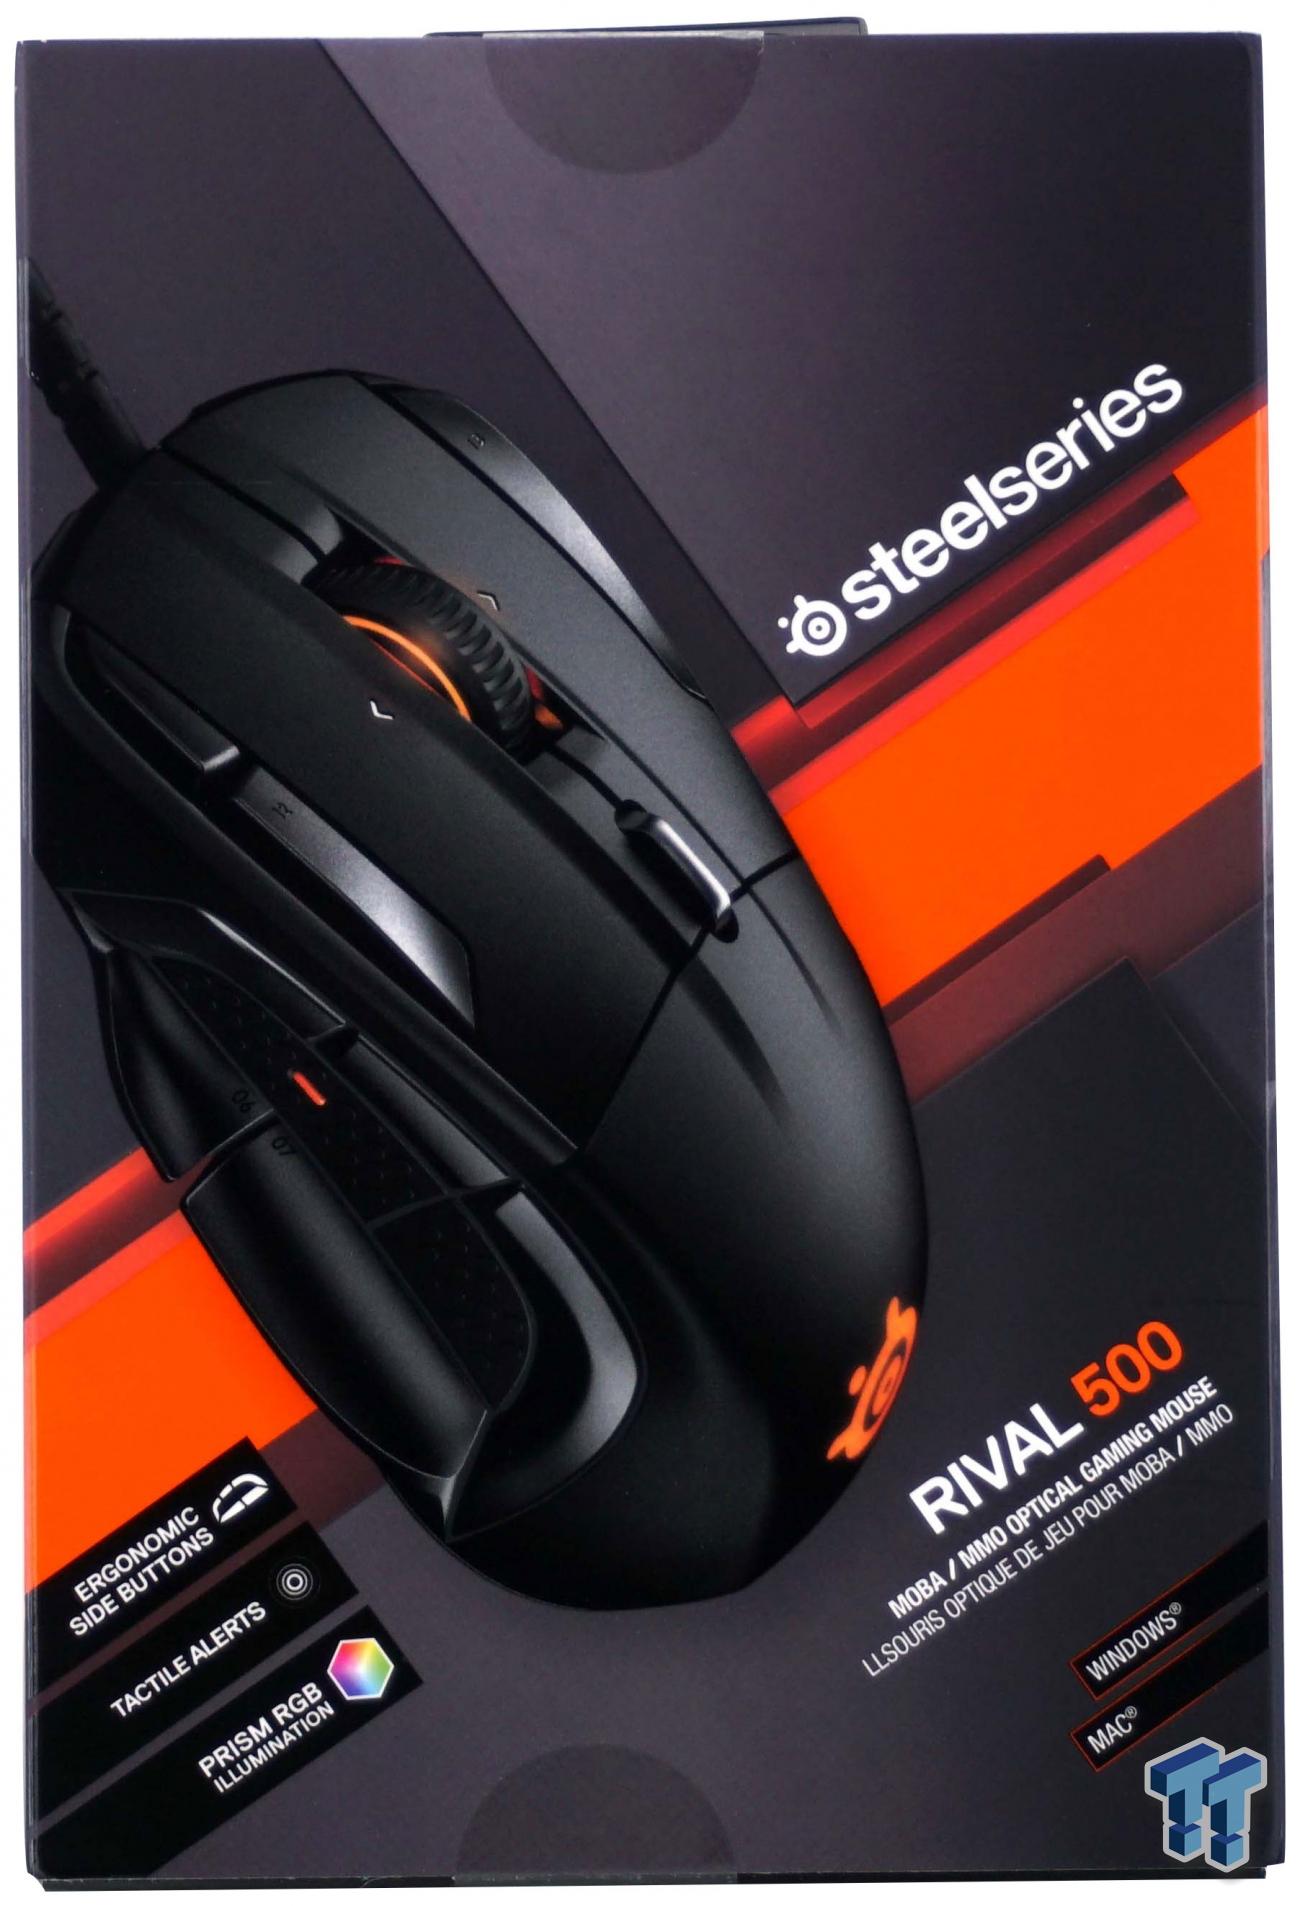 steelseries wow mouse not connecting to base